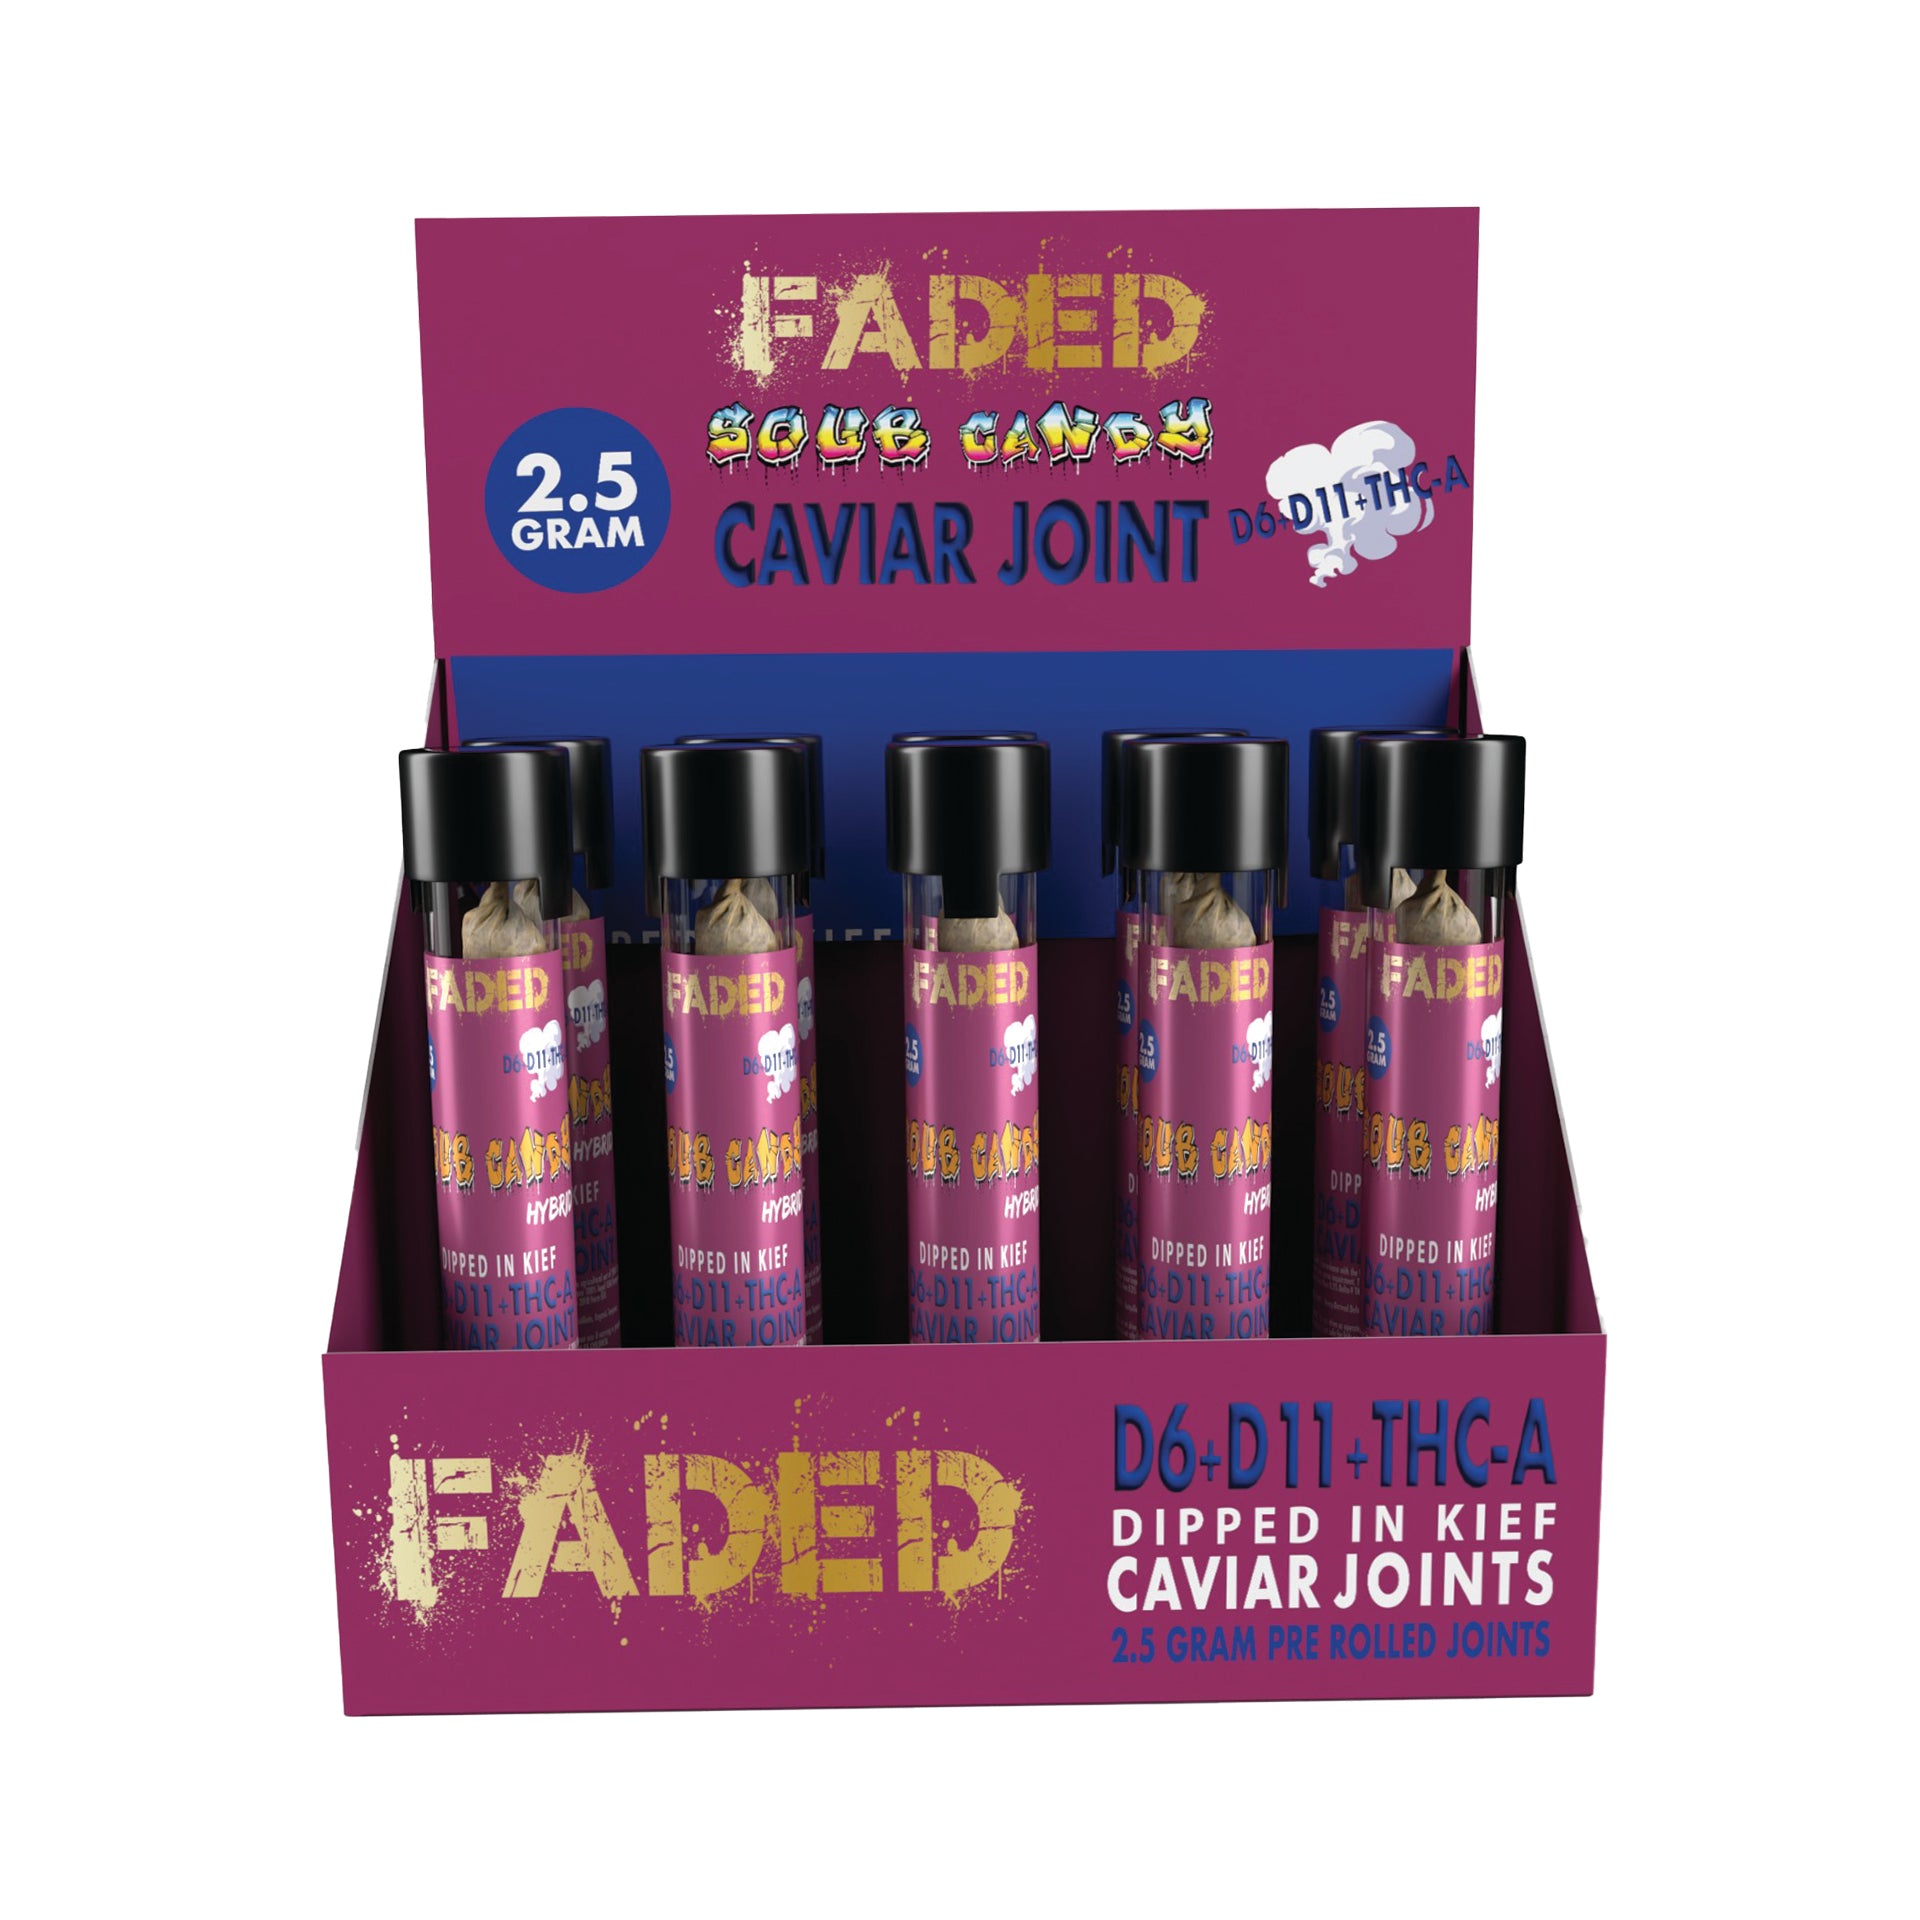 FADED DELTA 6 +DELTA-11+THC-A SOUR CANDY CAVIAR JOINTS 2500MG